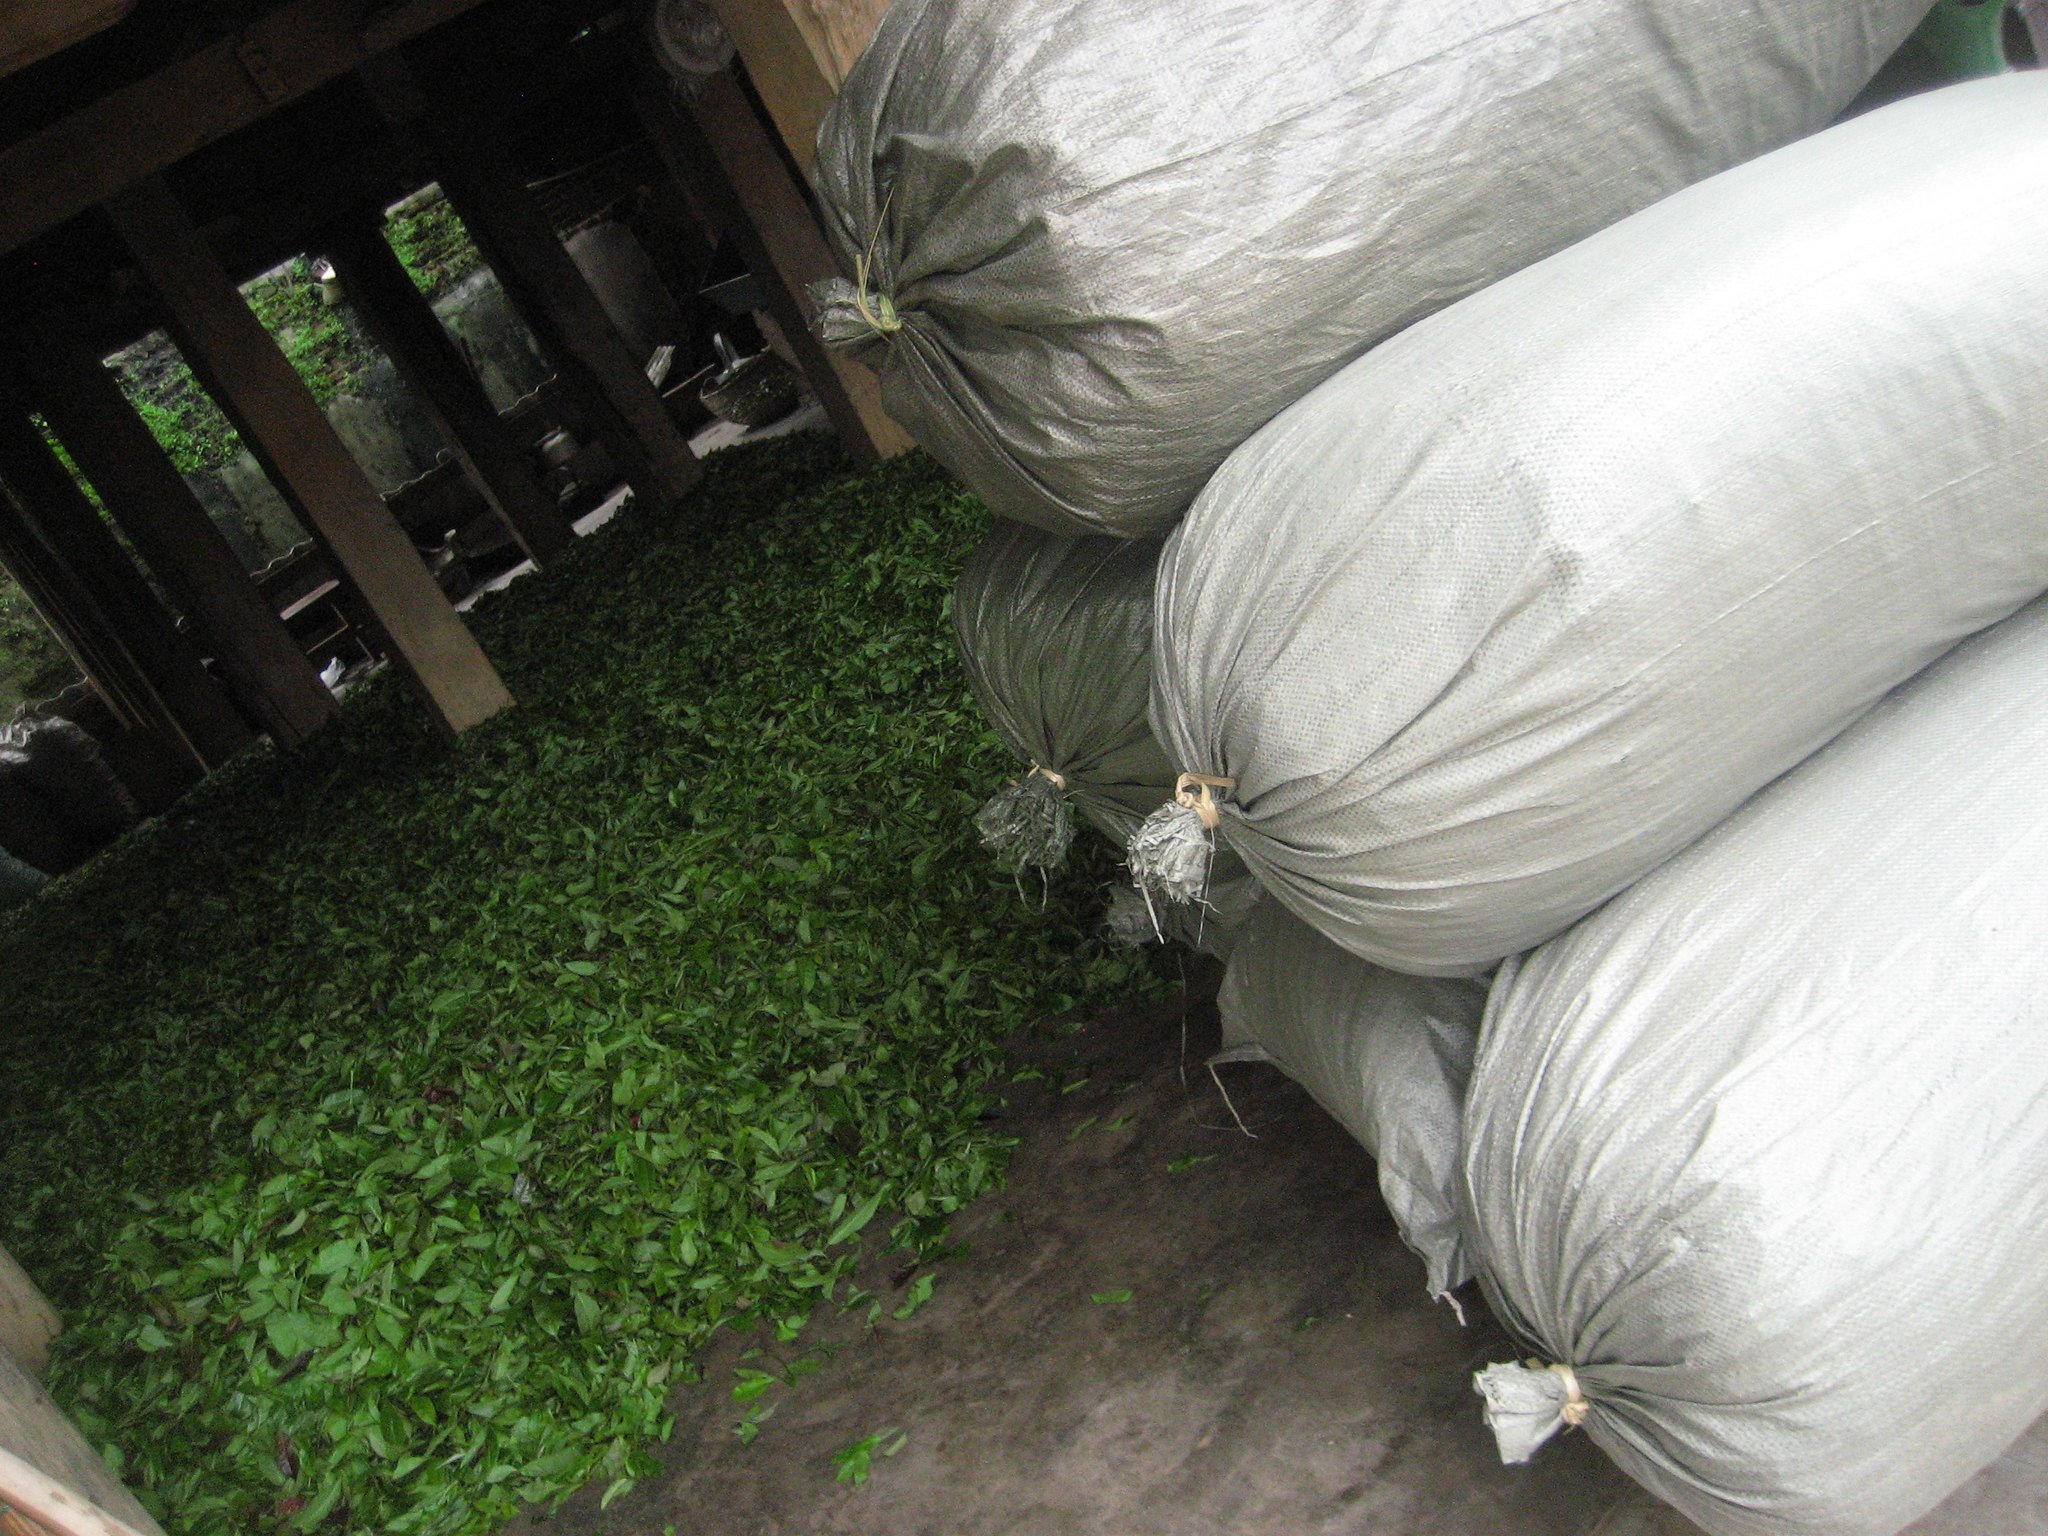 Bags of Withered and Dried Tea Ready to Sell